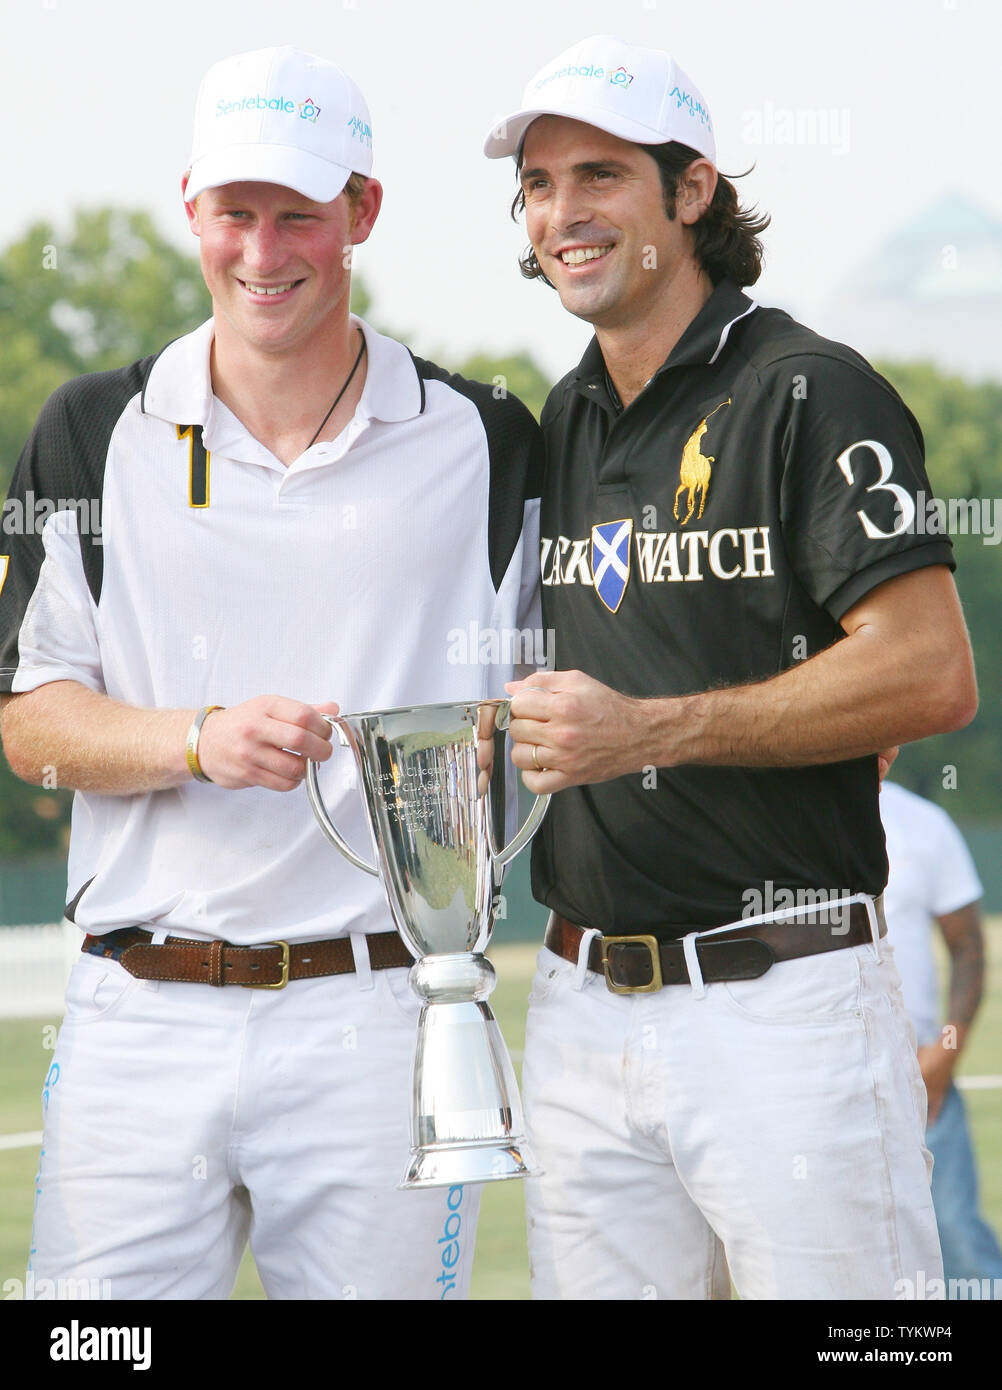 Prince Harry of Wales (L) and Argentina polo star Nacho Figueras pose together with the winners trophy during the award ceremony of the third annual Veuve Clicquot Polo Classic match on Governors Island on June 27, 2010 in New York.   UPI/Monika Graff Stock Photo